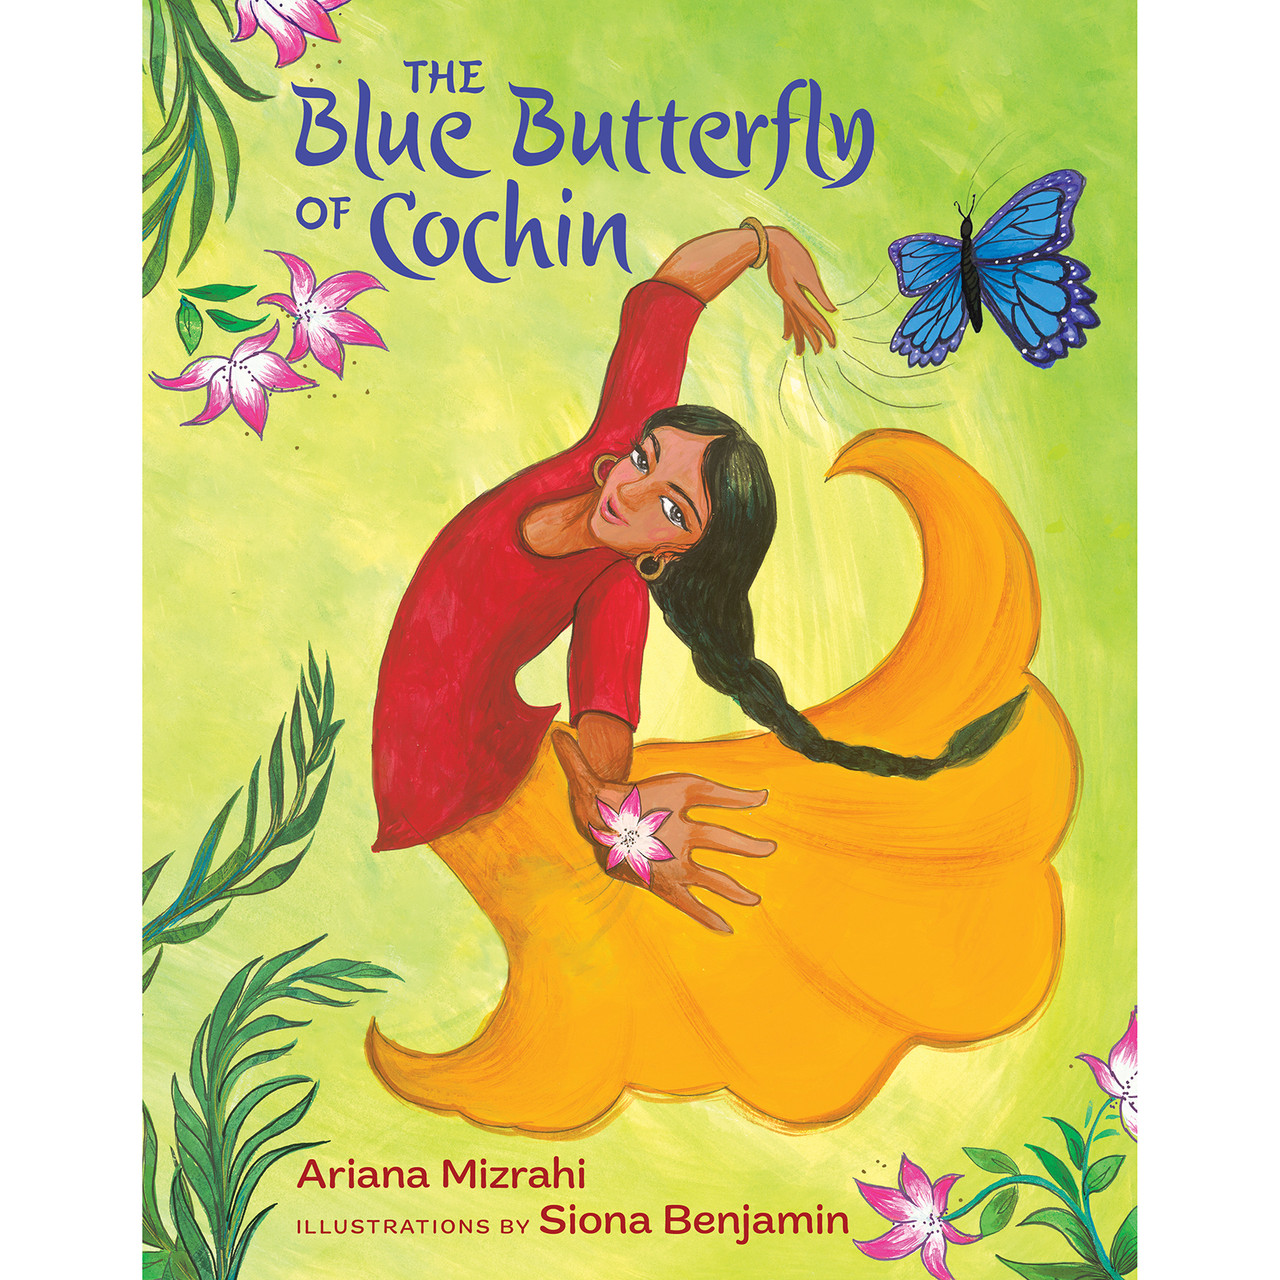 “The Blue Butterfly of Cochin” – A story of history, identity, Israel, and home